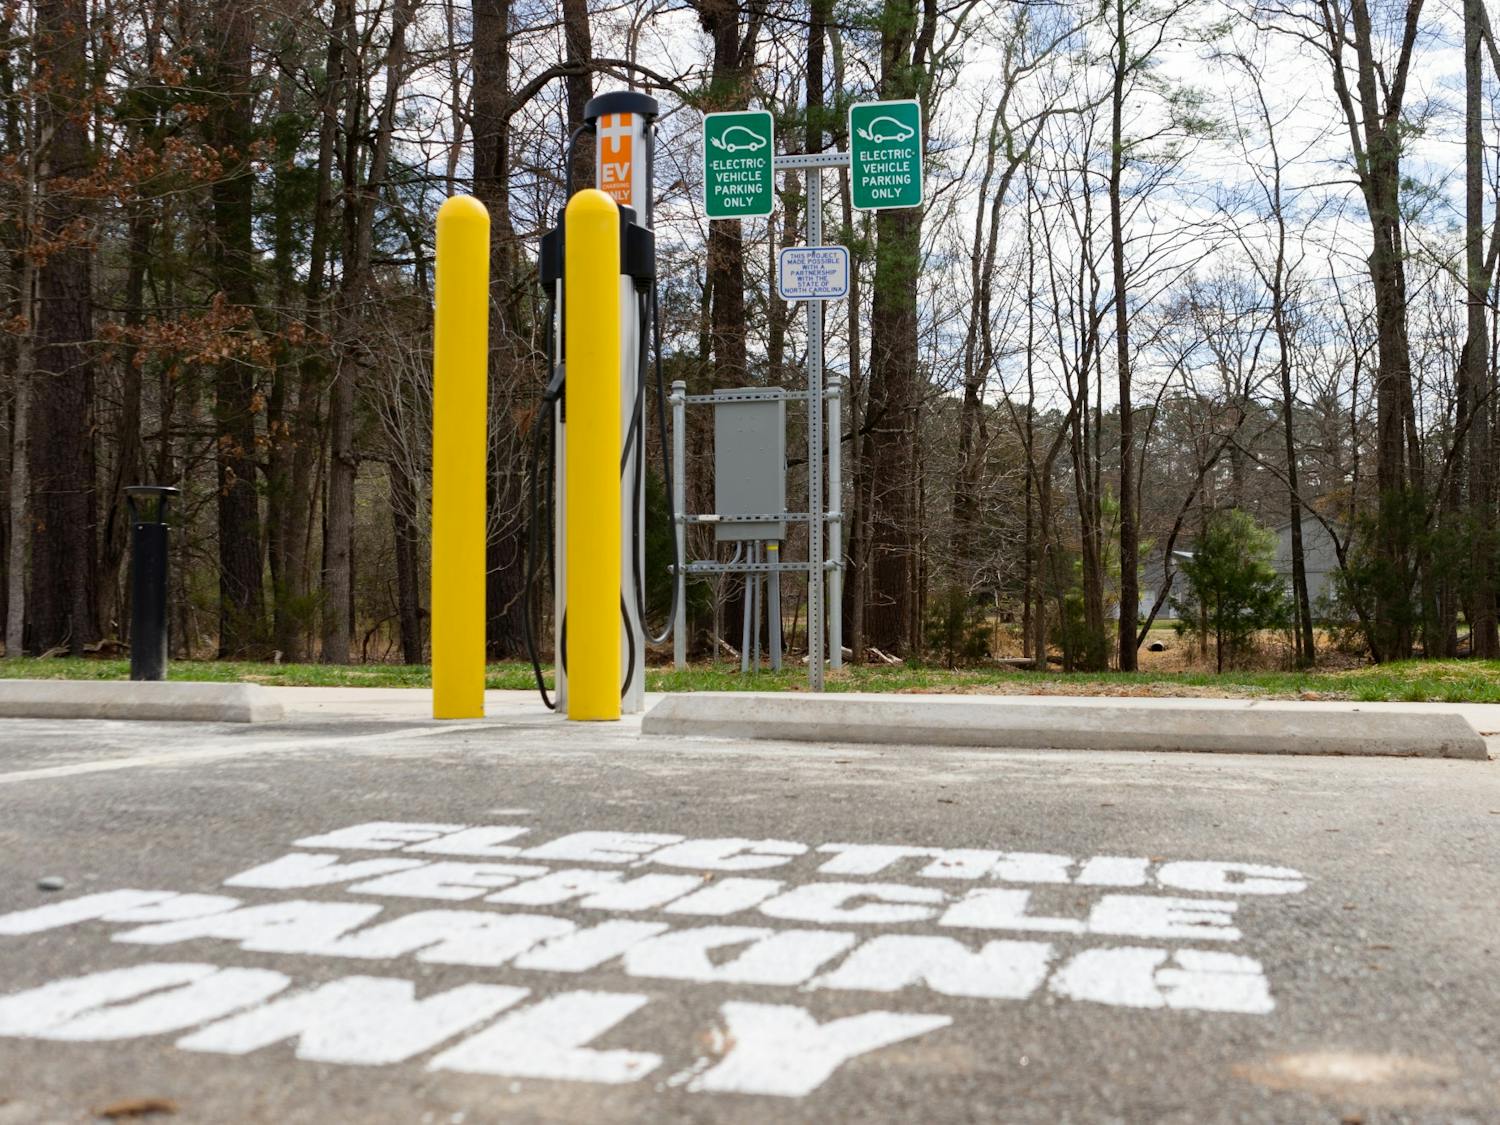 An EV charging station in the parking lot of Martin Luther King Jr. Park in Carrboro, as pictured on Thursday, Mar. 3, 2022. This is one of two EV charging stations recently added in Carrboro.